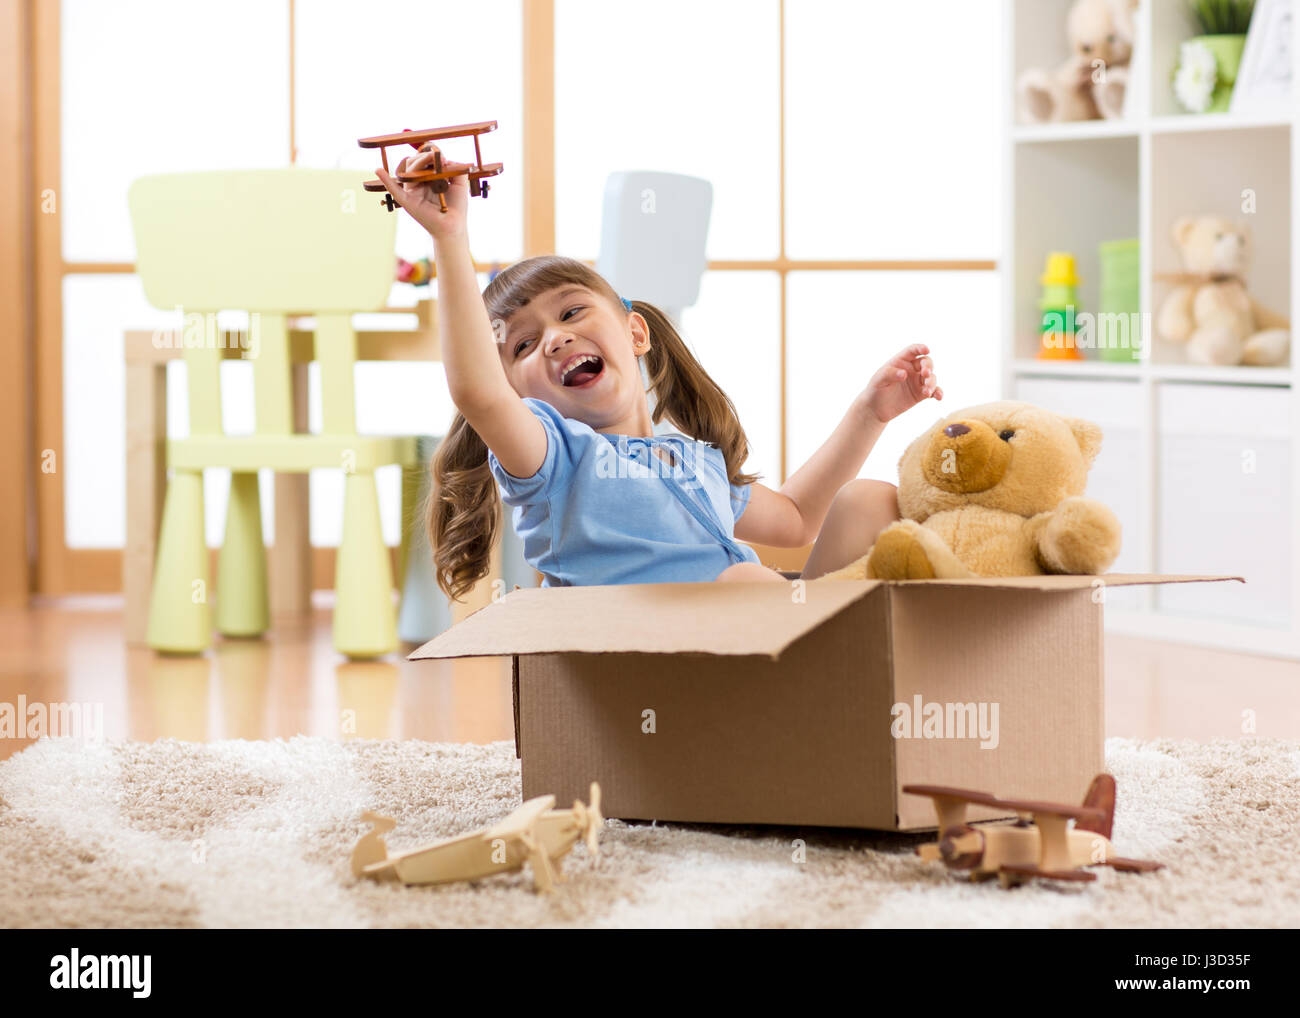 Kid playing pilot flying a cardboard box in children room Stock Photo